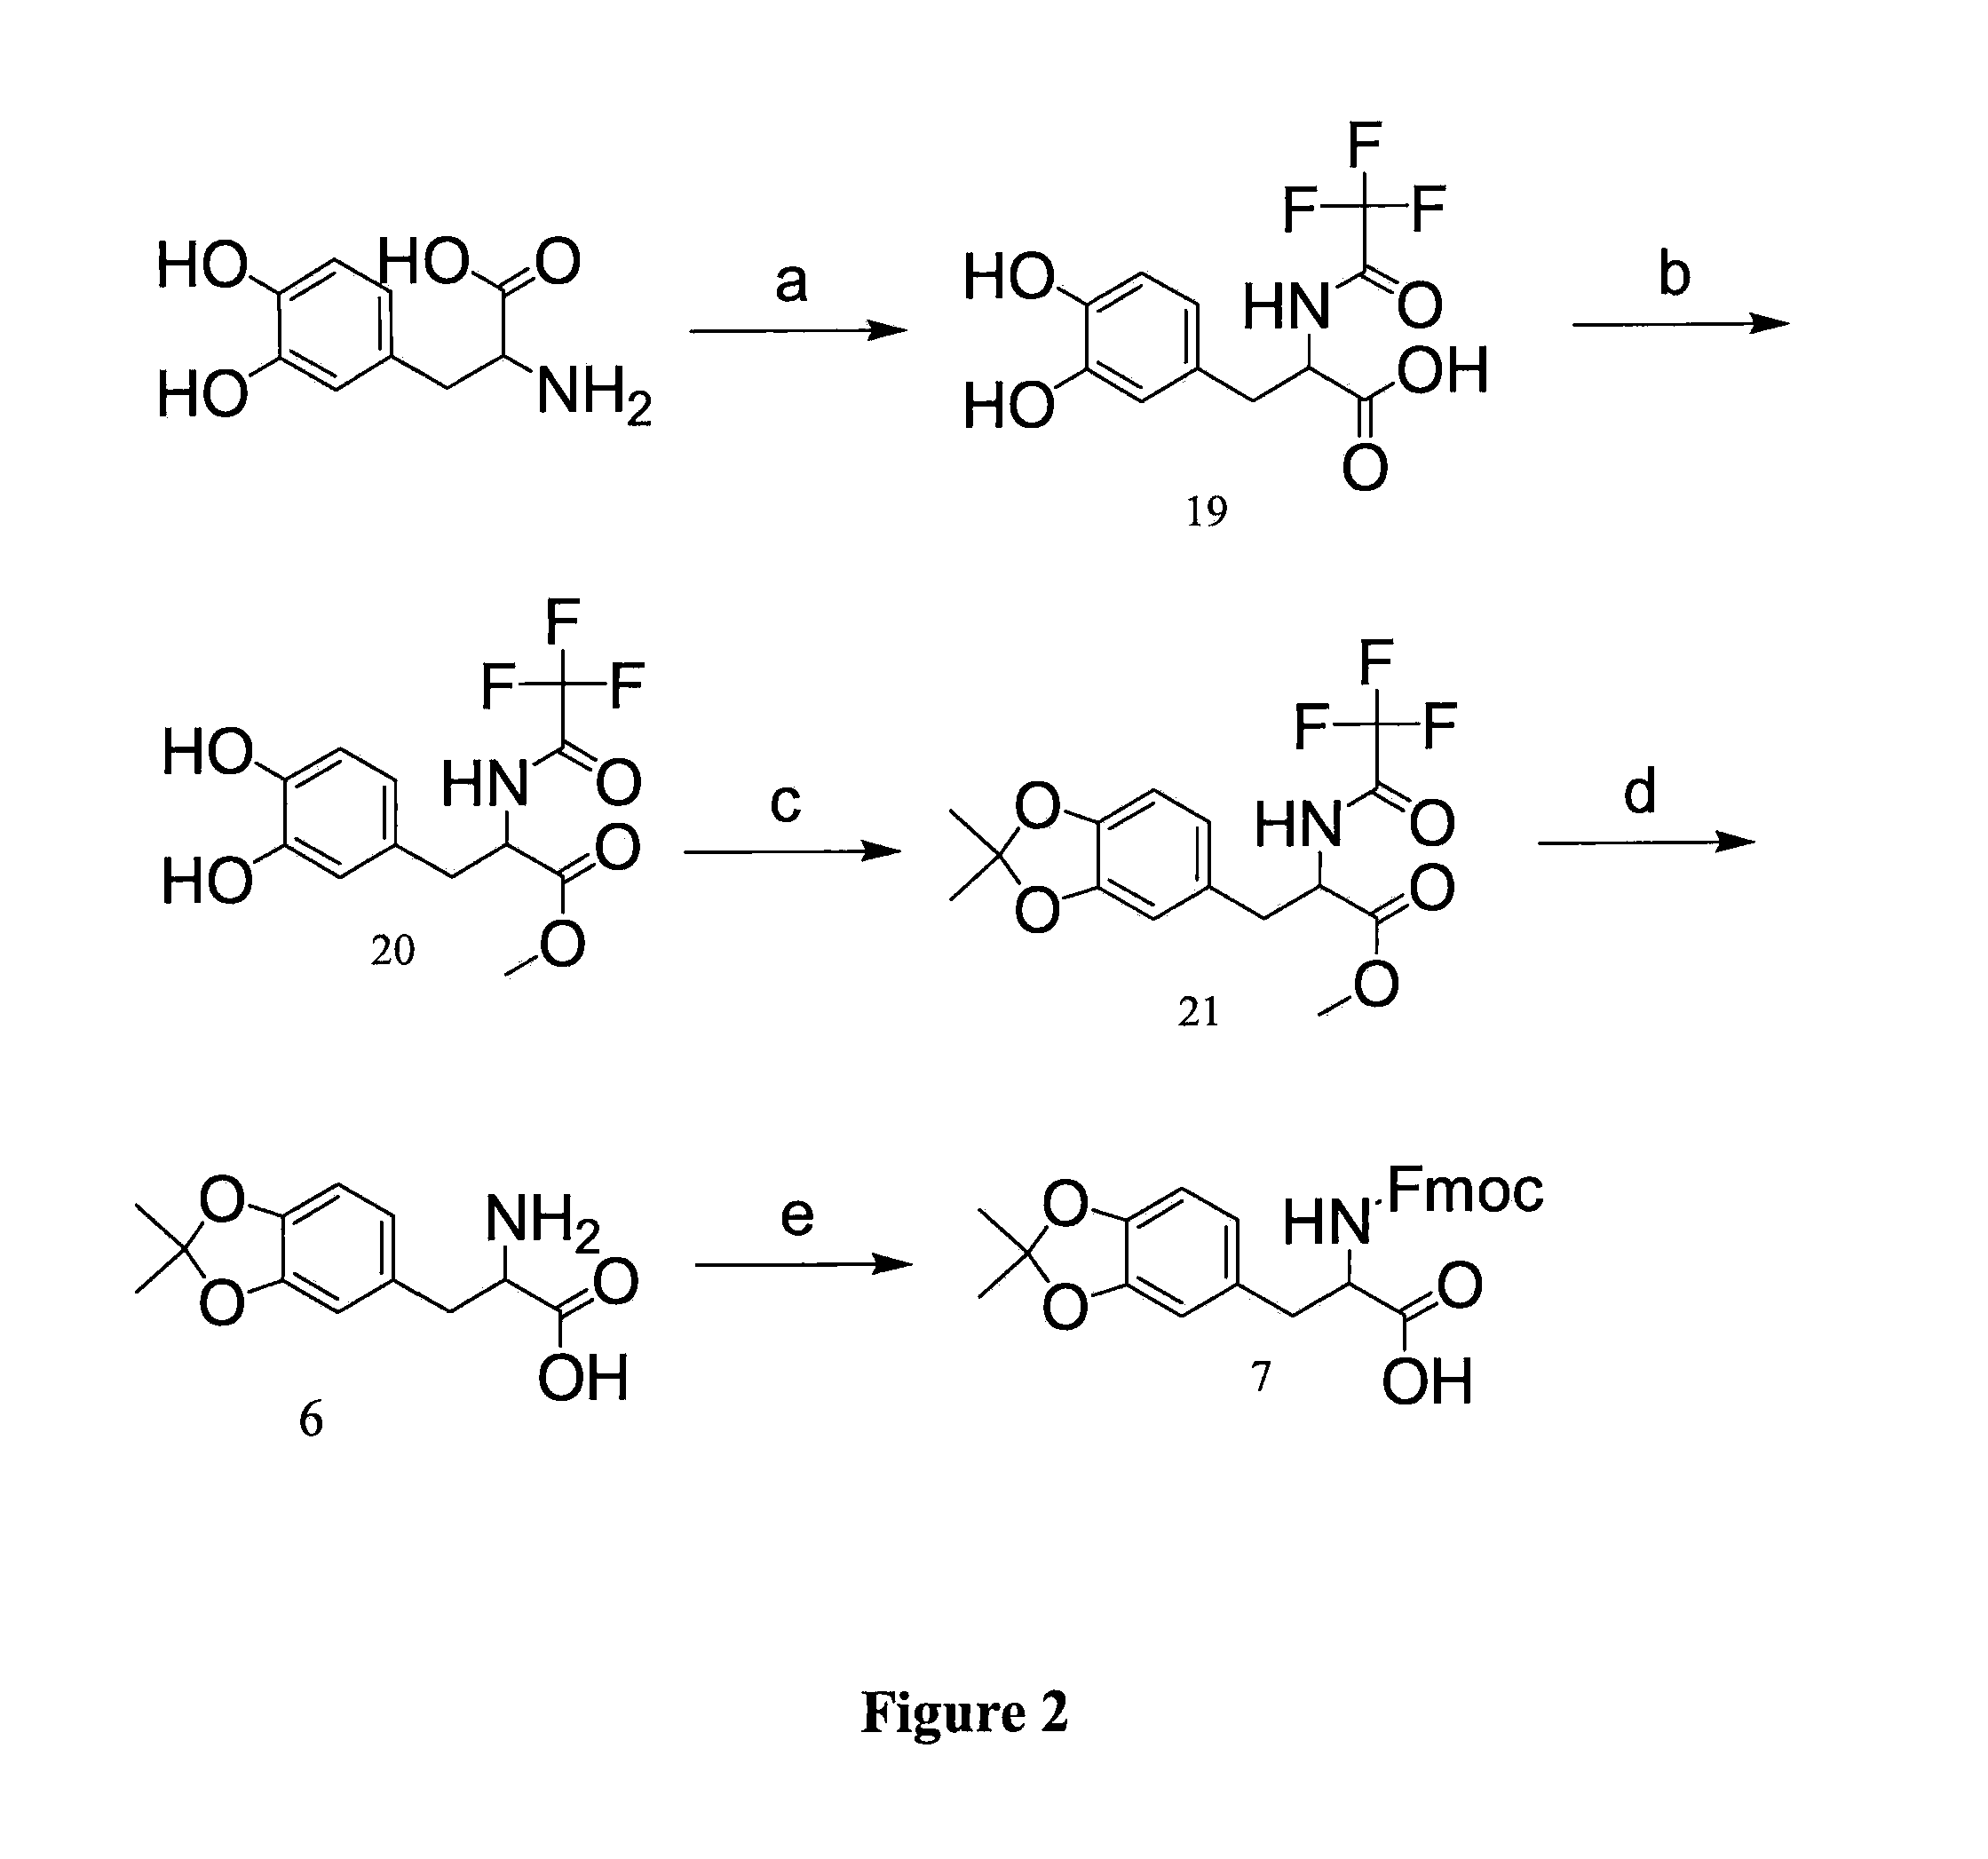 Method of Synthesizing Acetonide-Protected Catechol-Containing Compounds and Intermediates Produced Therein